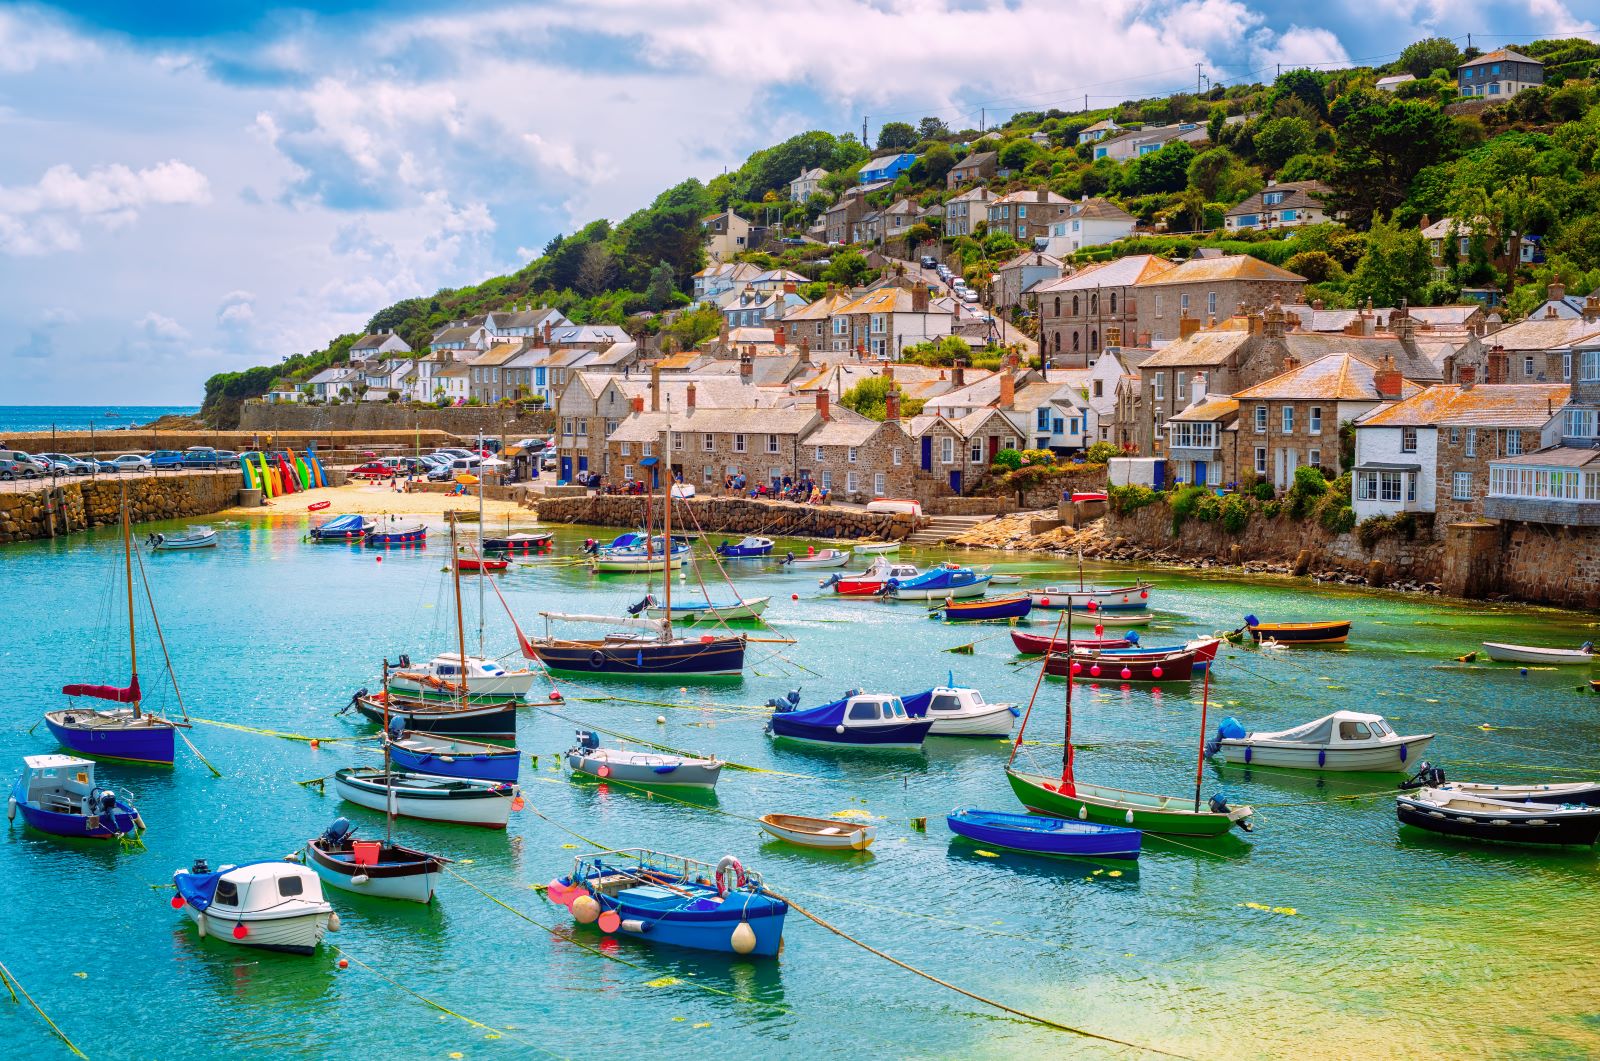 <p class="wp-caption-text">Image Credit: Shutterstock / Boris Stroujko</p>  <p><span>Cornwall, at the southwestern tip of England, is a picturesque county known for its rugged coastline, quaint fishing villages, and beautiful sandy beaches. Dramatic cliffs, hidden coves, and the expansive moors inland mark the region’s landscape. Cornwall’s maritime heritage is alive in its ports and harbors, where traditional fishing boats are still a common sight. The South West Coast Path offers miles of scenic walks along the coastline, providing access to some of the area’s most stunning views and secluded beaches. Cornwall is also rich in folklore and history, adding ancient stone circles and tales of smugglers and pirates to its mystique. The county’s culinary scene thrives, emphasizing local seafood, traditional Cornish pasties, and artisanal products.</span></p> <p><b>Insider’s Tip: </b><span>For a unique experience, visit the Minack Theatre, an open-air theater carved into the granite cliff overlooking the Atlantic Ocean. Check the schedule for performances or visit during the day to enjoy the spectacular setting.</span></p> <p><b>When to Travel: </b><span>The best time to visit Cornwall is from May to September when the weather is warmer and drier, making it ideal for exploring the outdoors and enjoying the beaches.</span></p> <p><b>How to Get There: </b><span>The nearest major airports are Exeter and Newquay, and train services from London and other major cities are also available. Renting a car is recommended for exploring Cornwall’s more remote areas and coastal villages.</span></p>